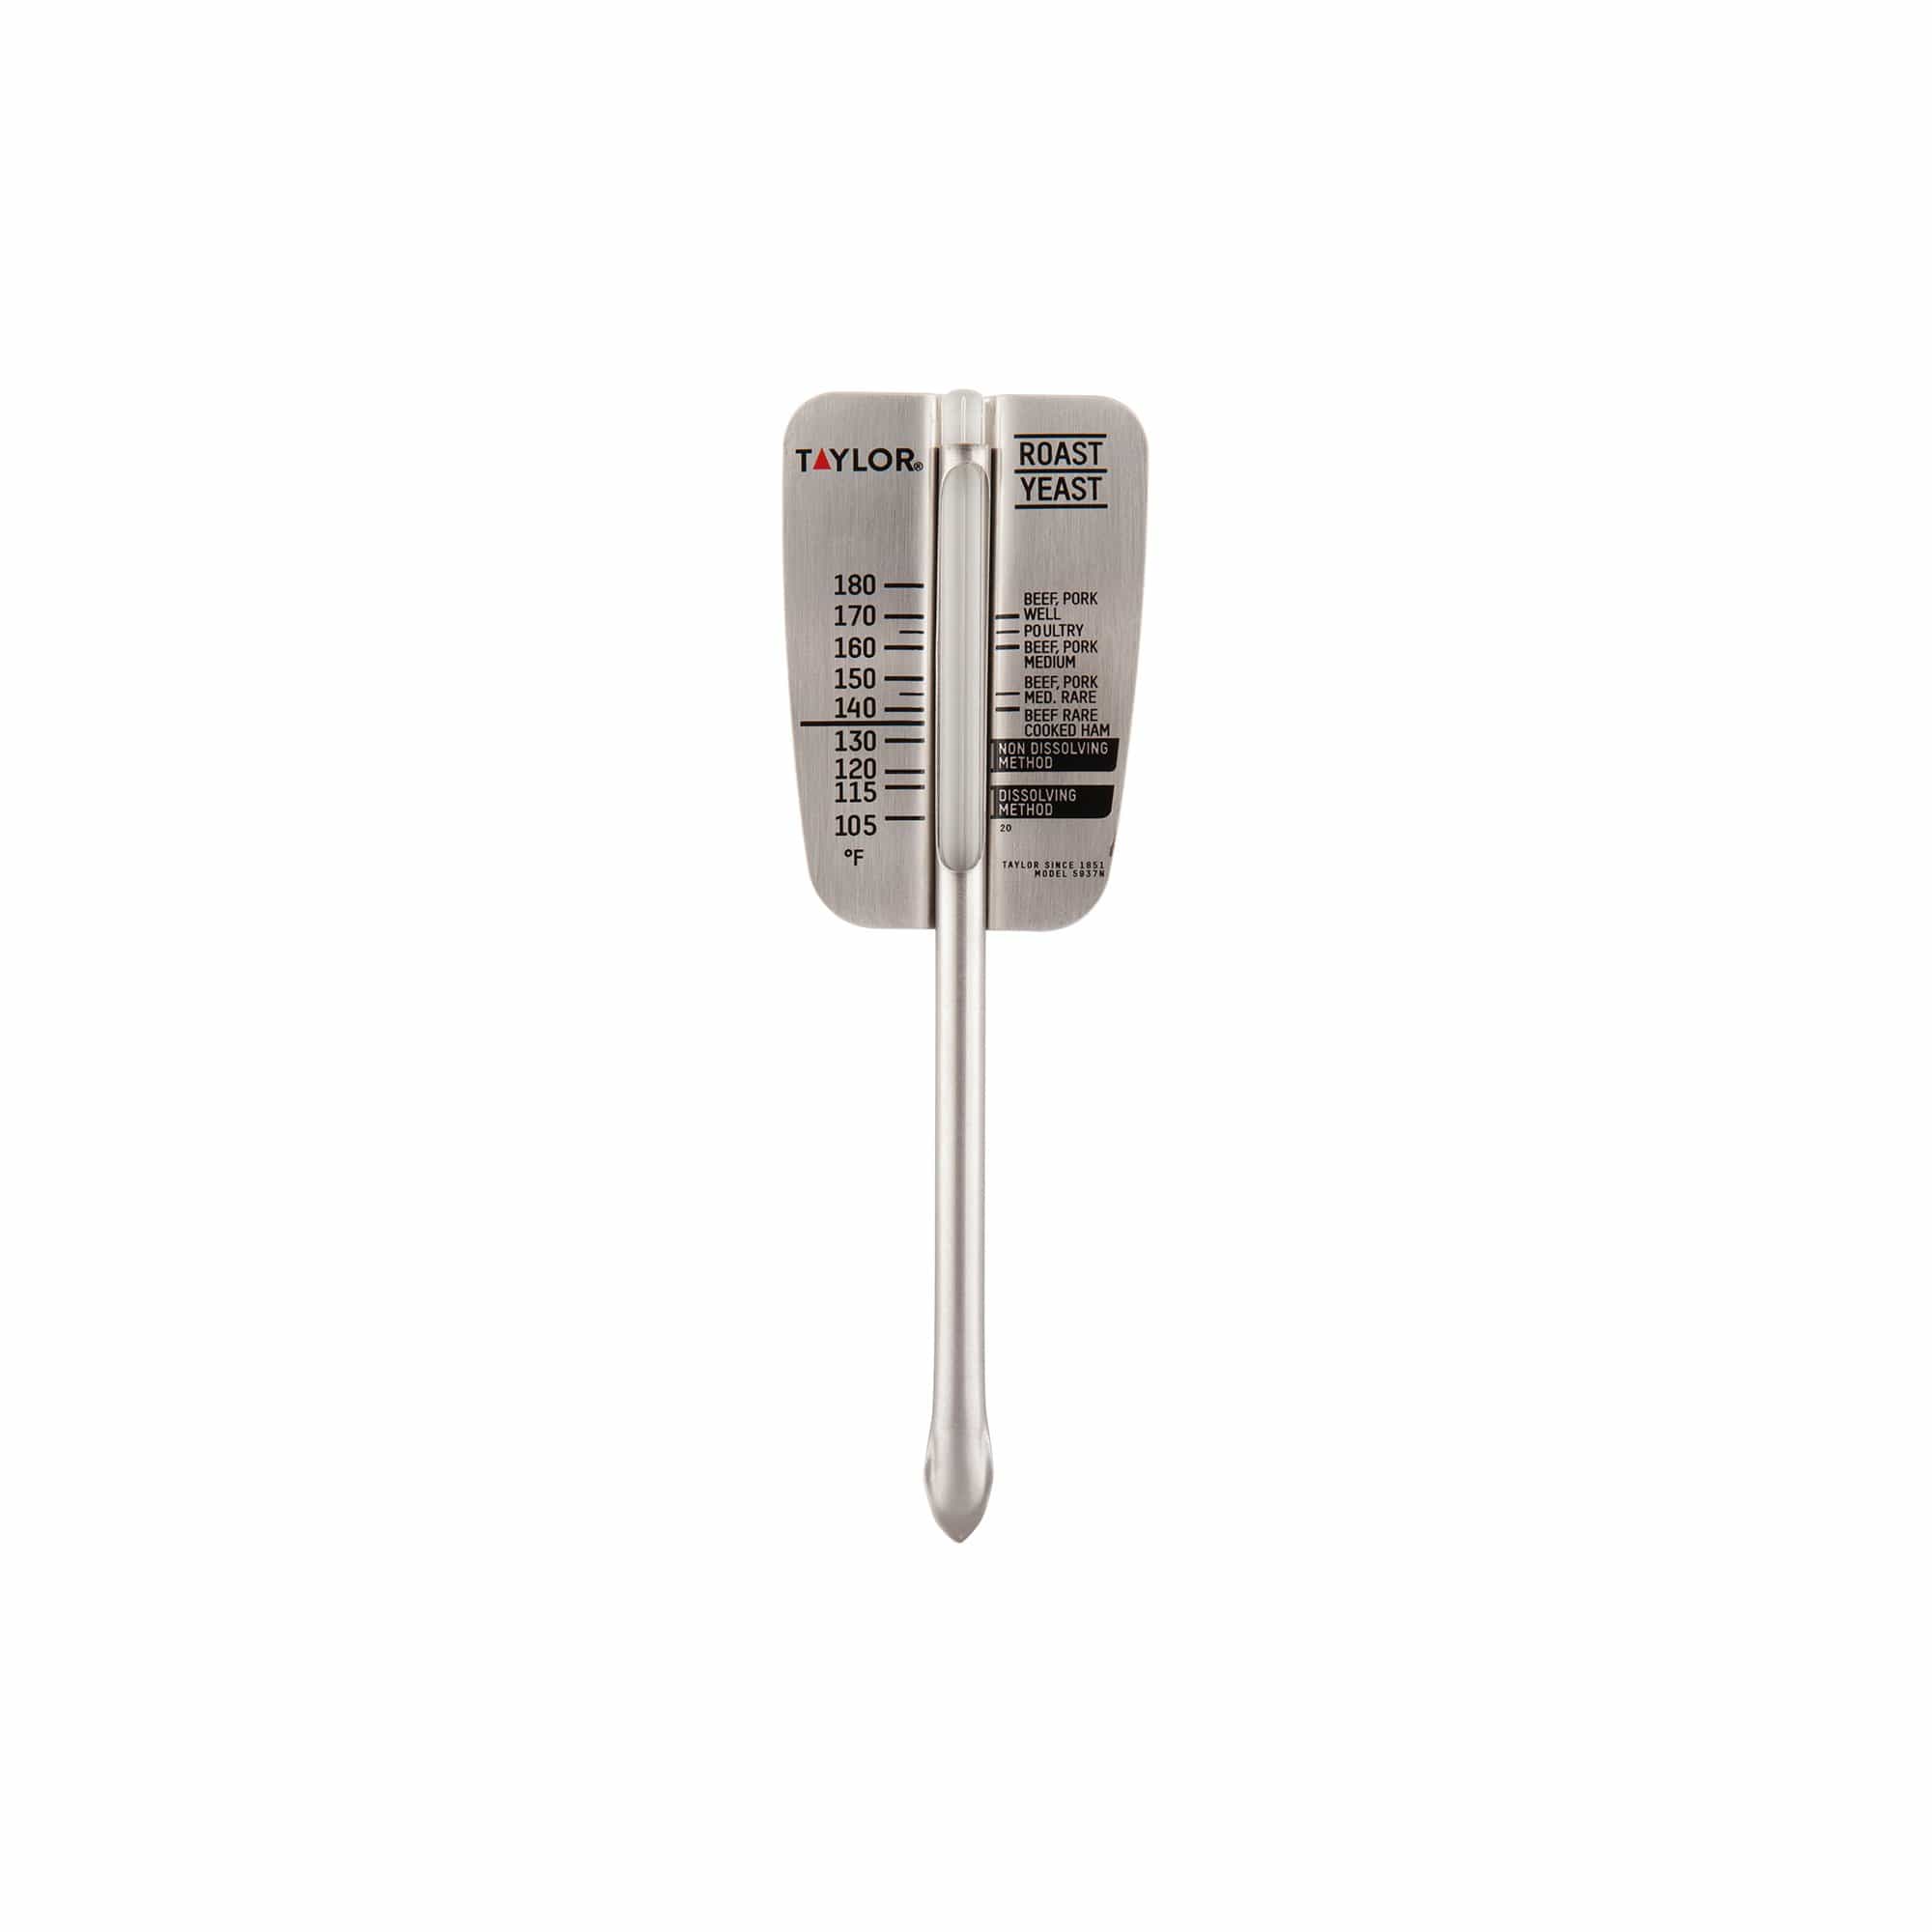 Taylor 5939N Meat Dial Thermometer Easy to read Measurement For